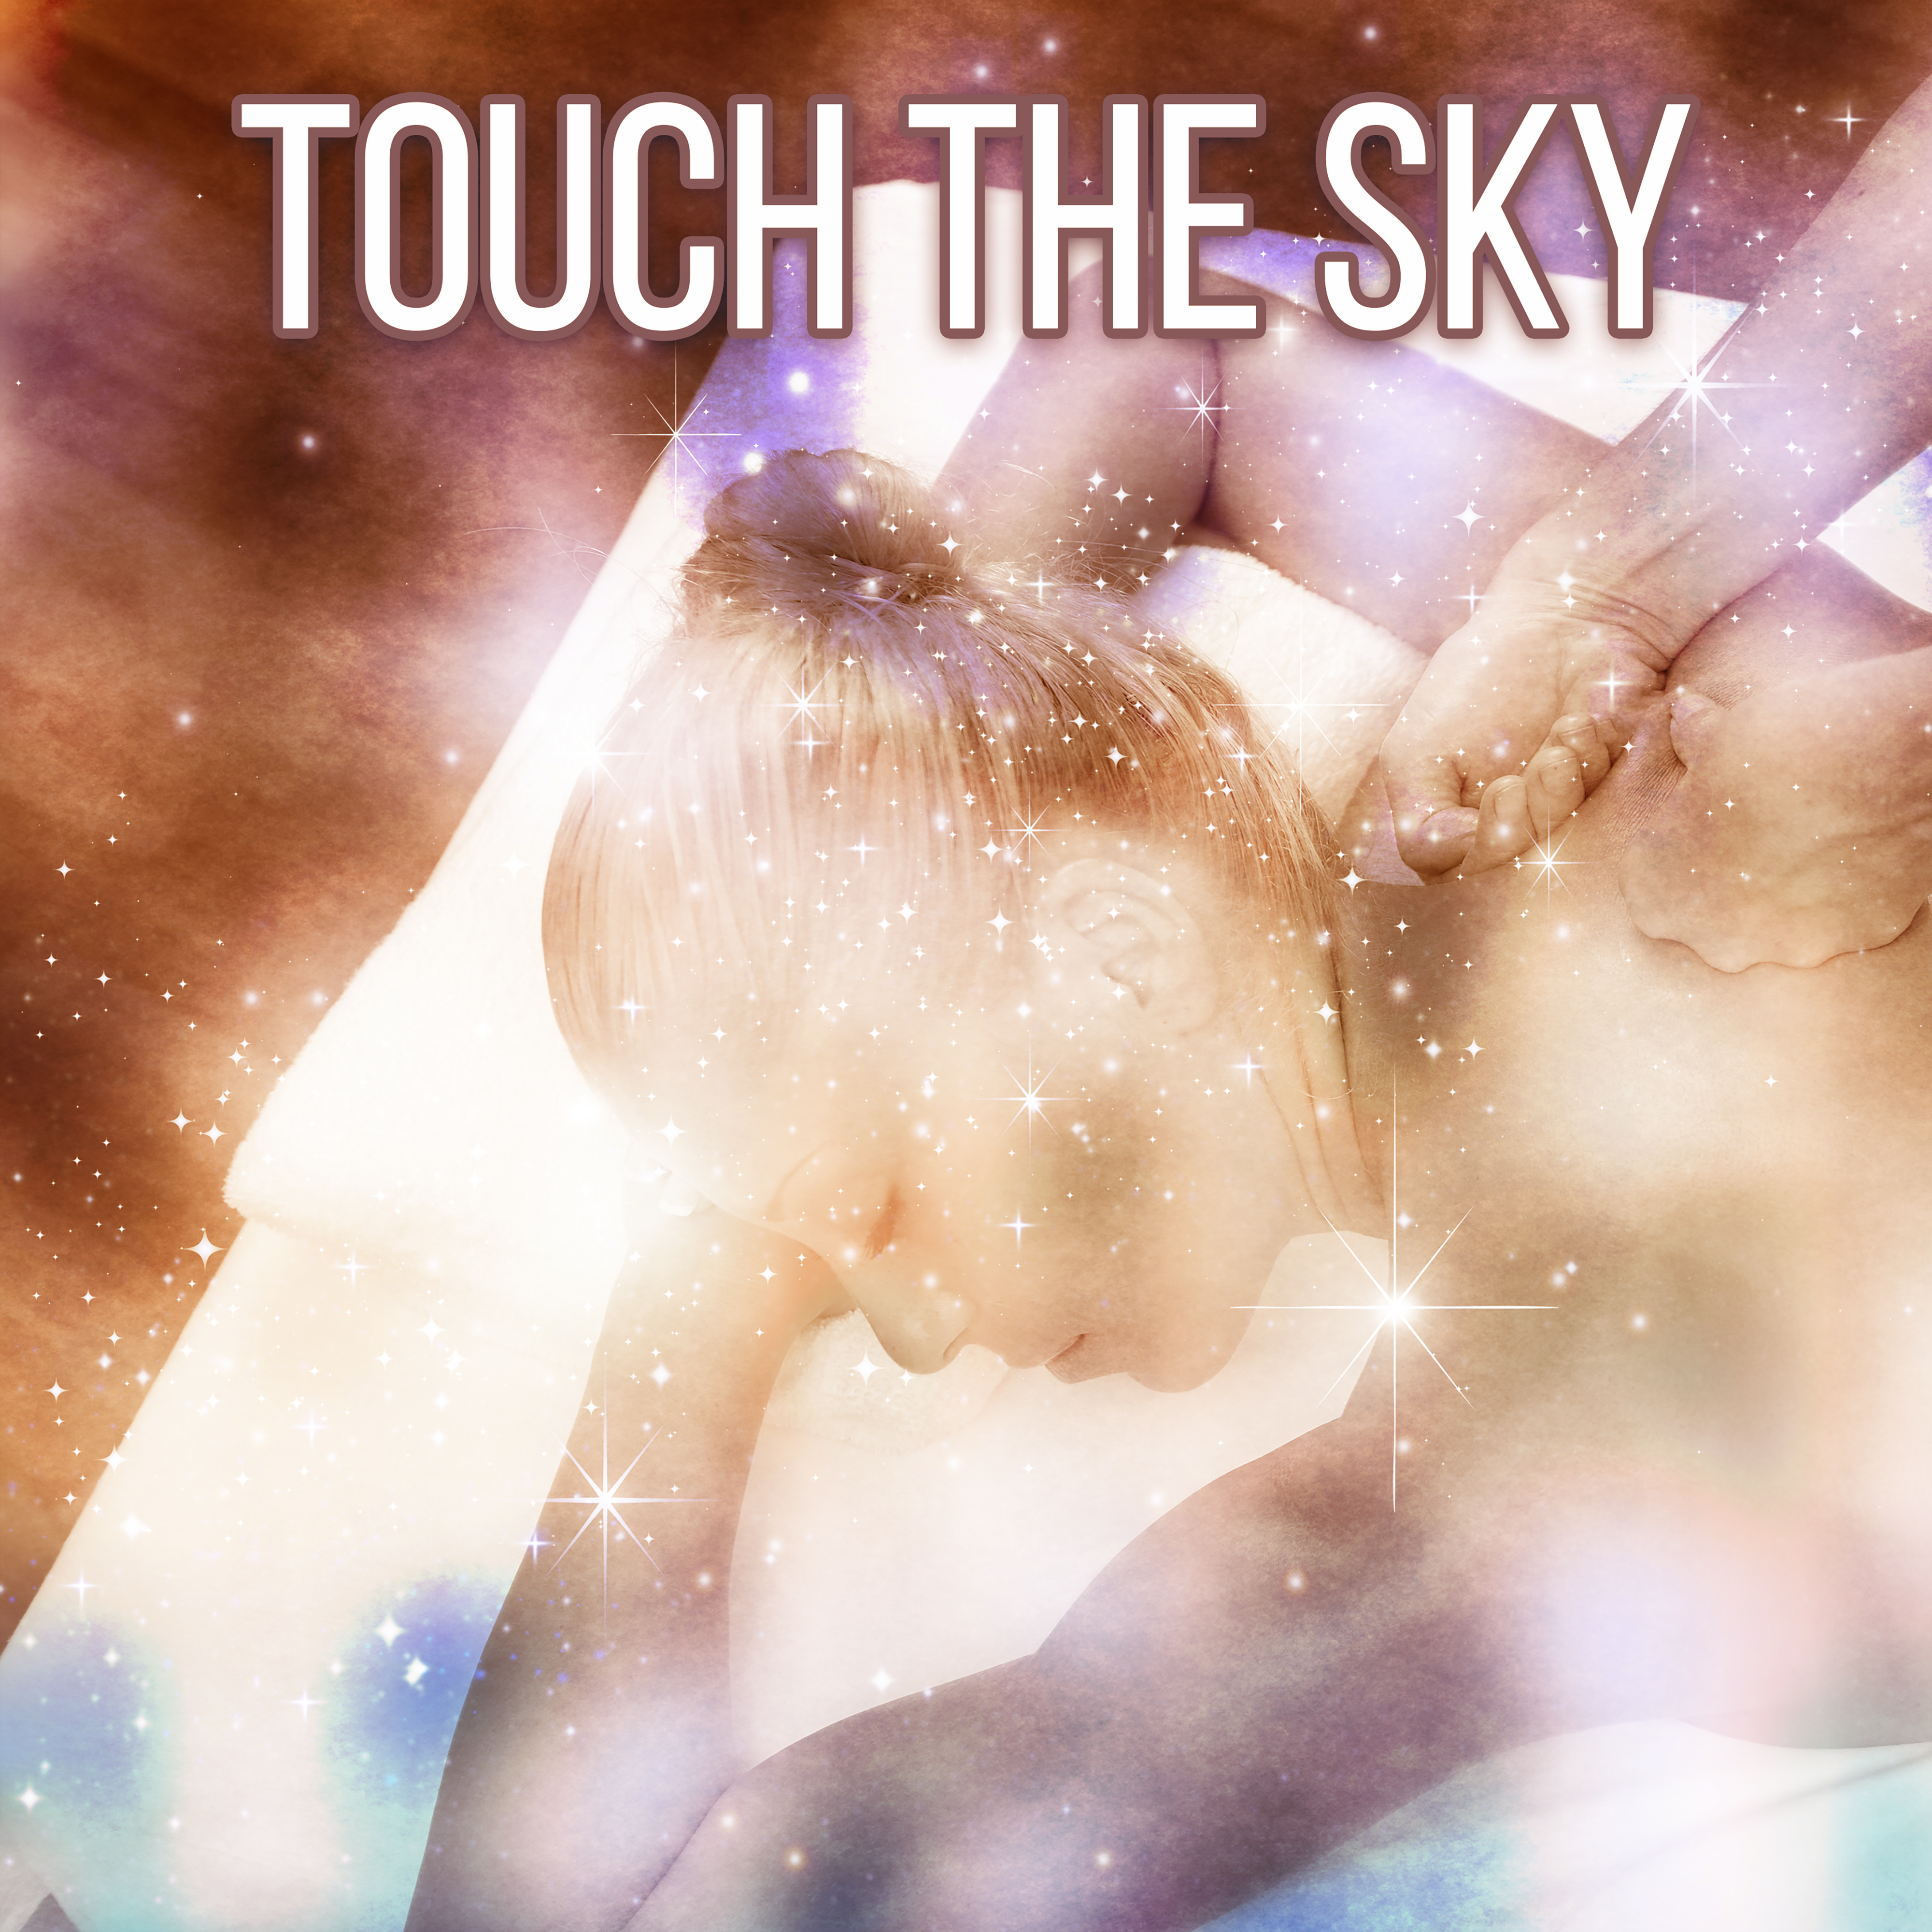 Touch the Sky – Relaxation Wellness, Spa Dreams, Soft Melodies for Rest, Wellness Sounds, Gentle Music for Soul